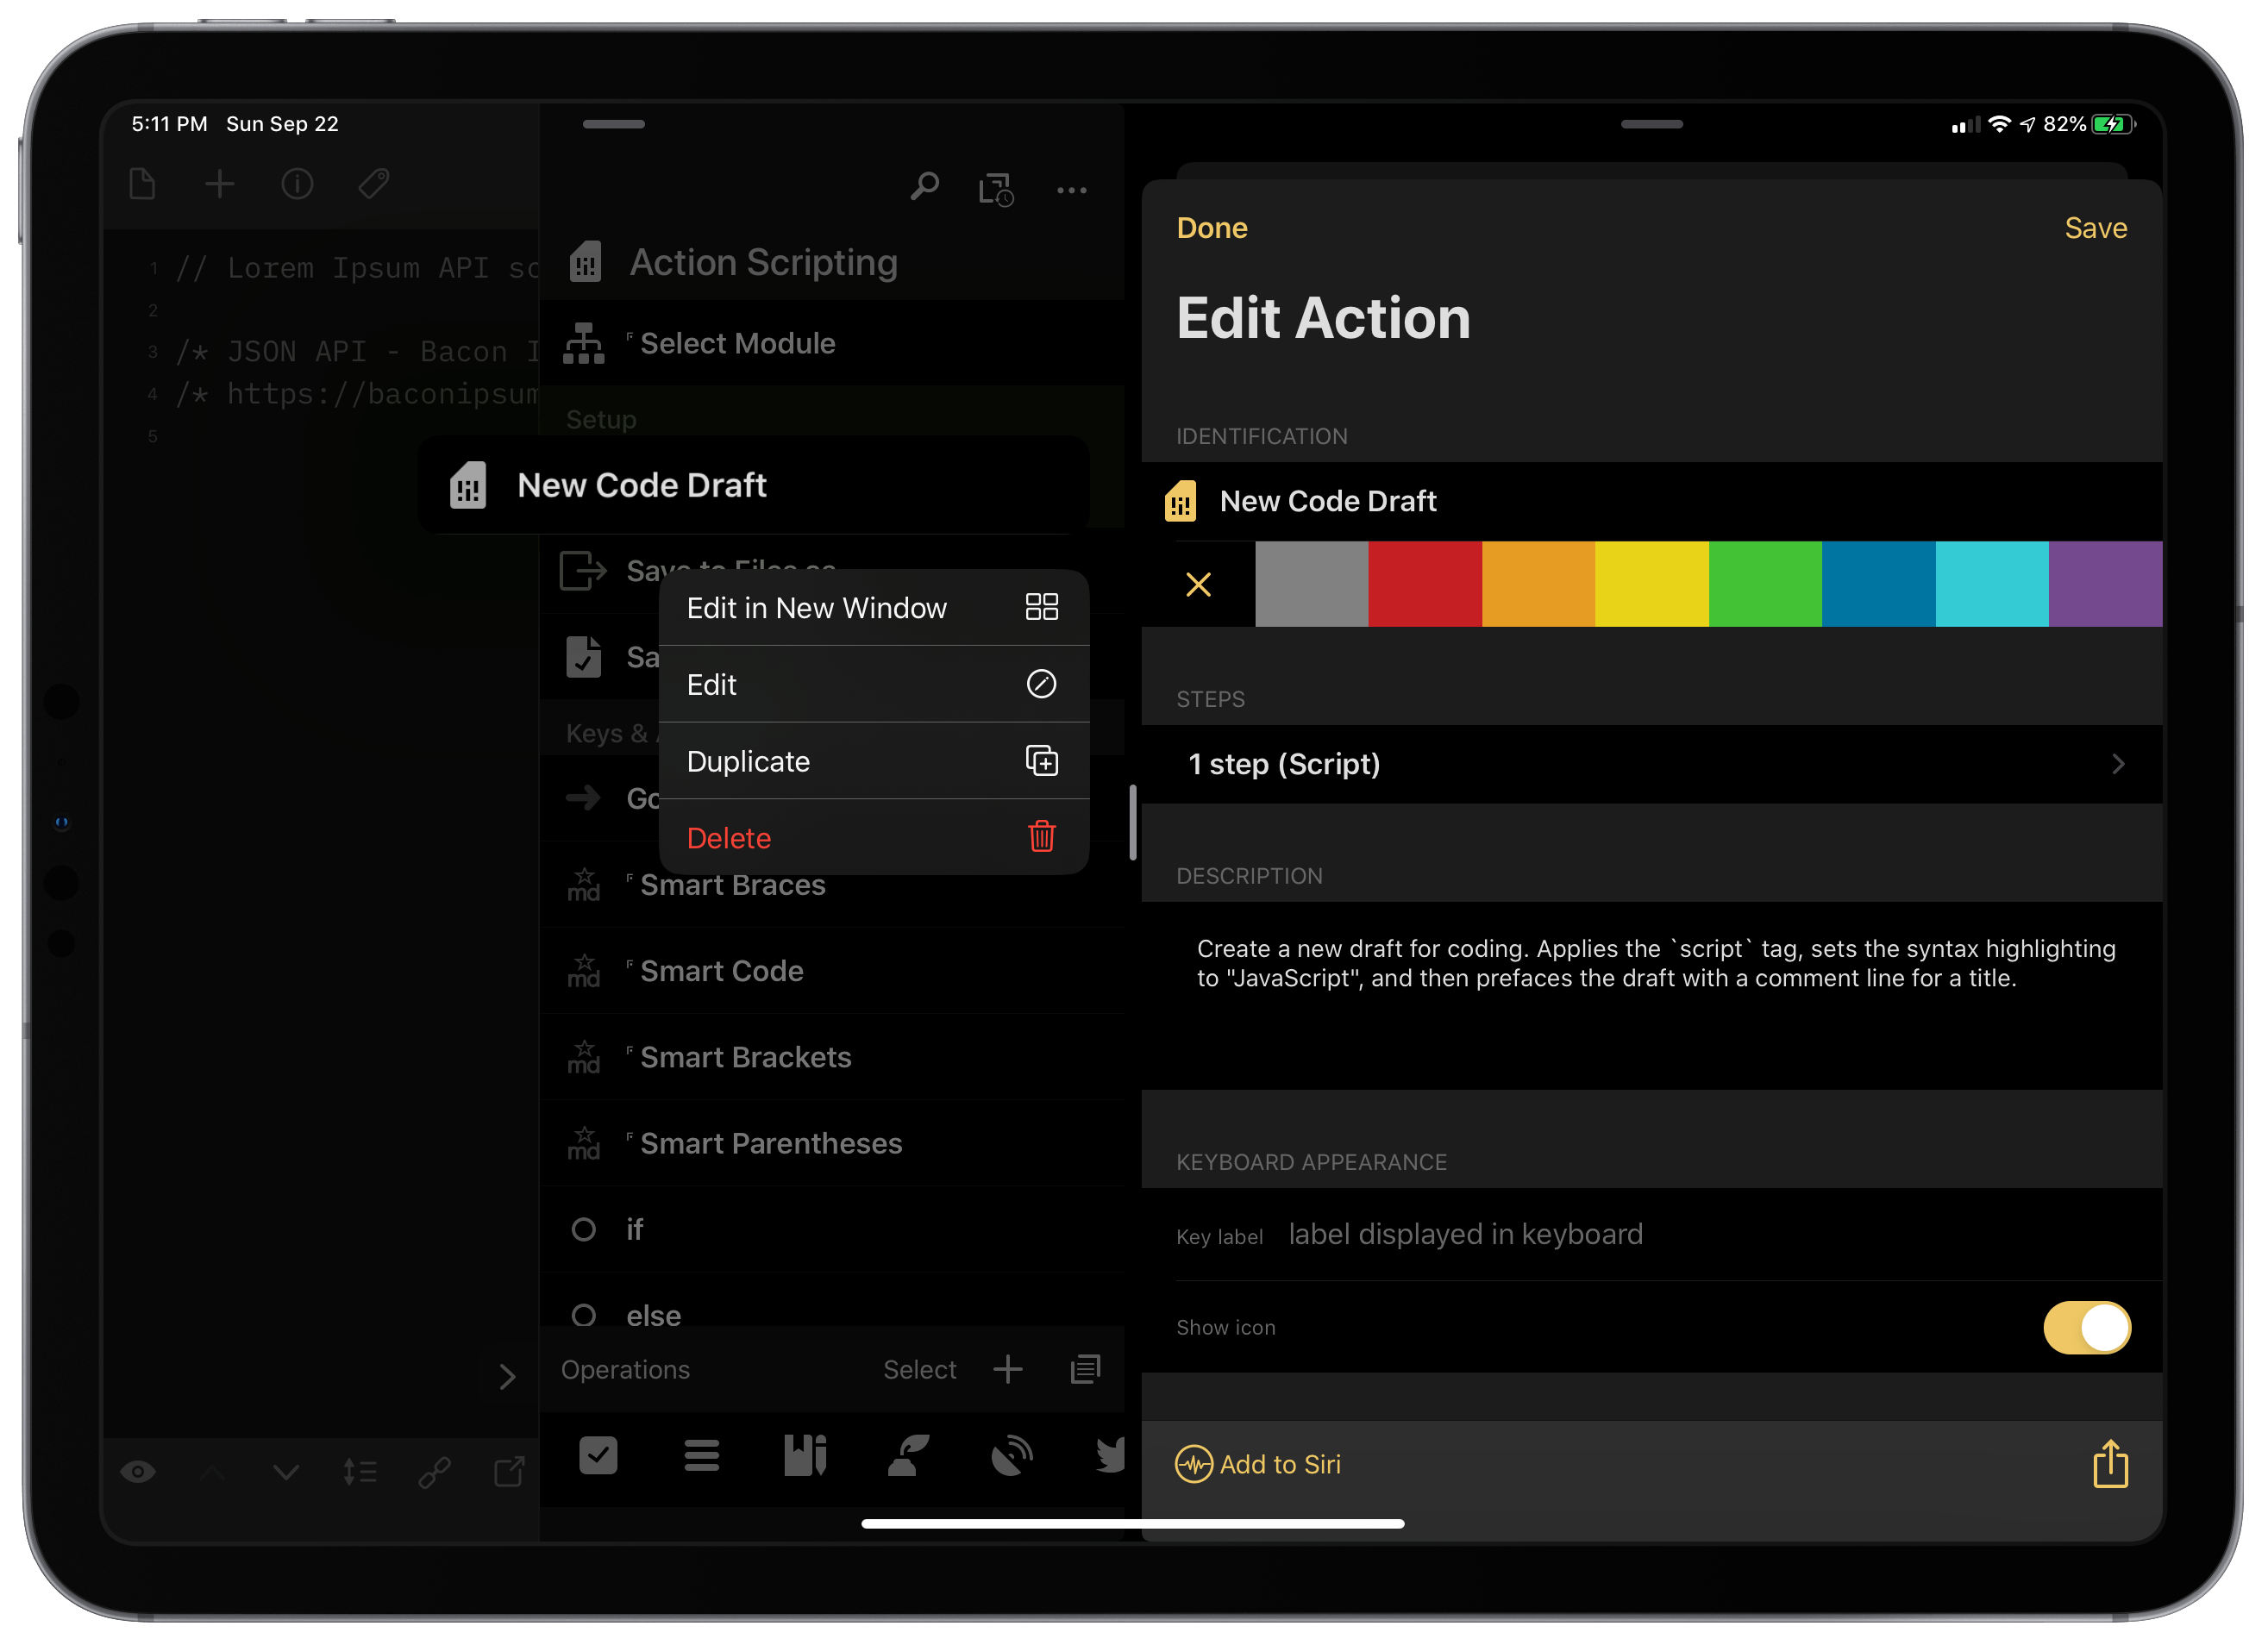 Using the context menu on an action loads another instance in Split View.